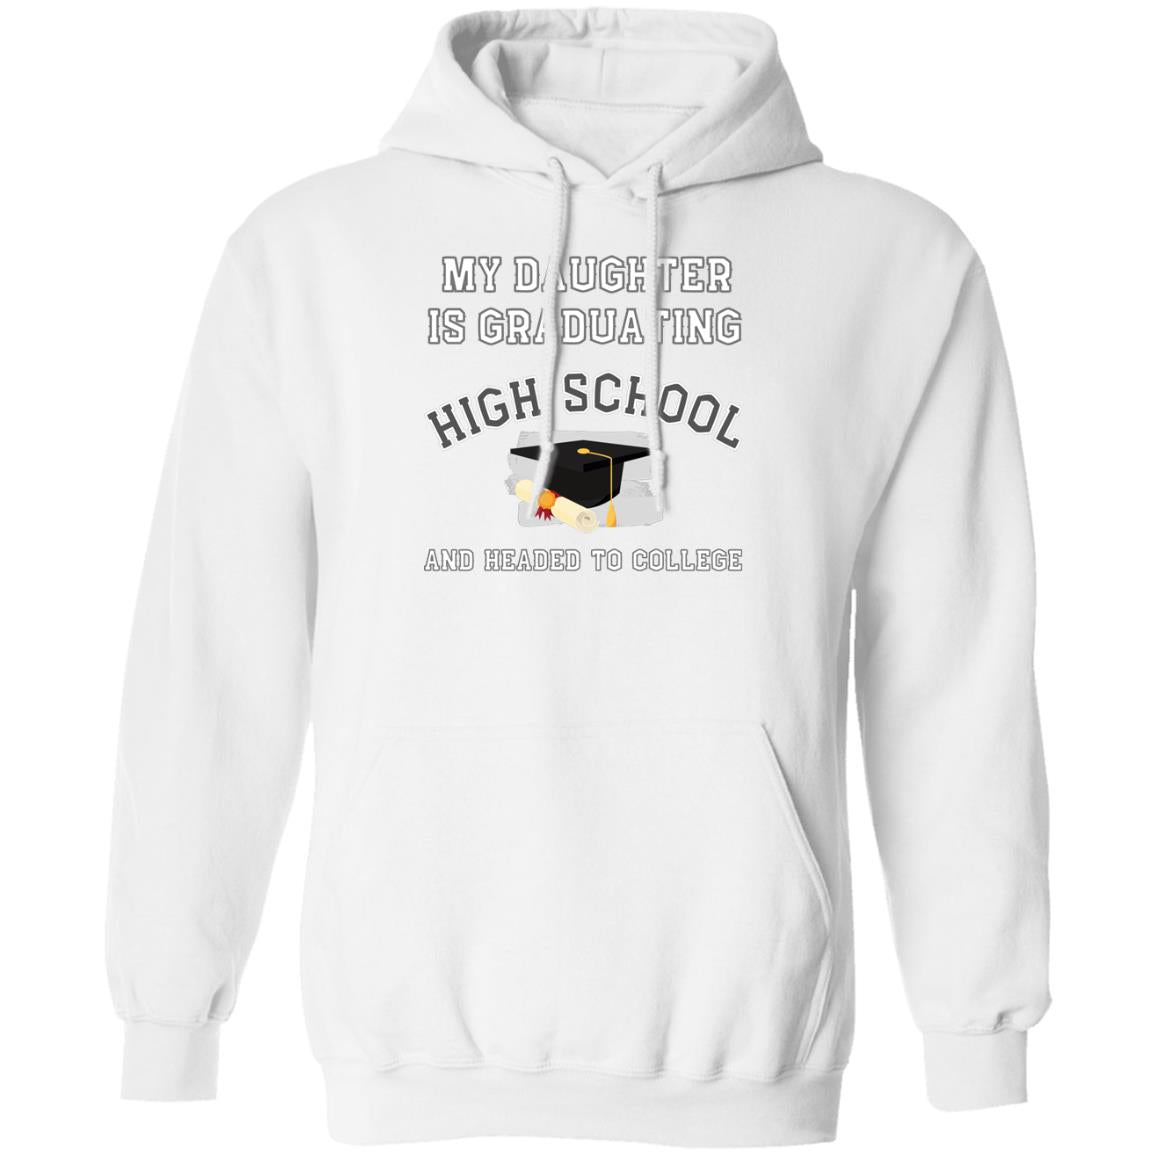 My daughter is graduating high school and headed to college Hoodie